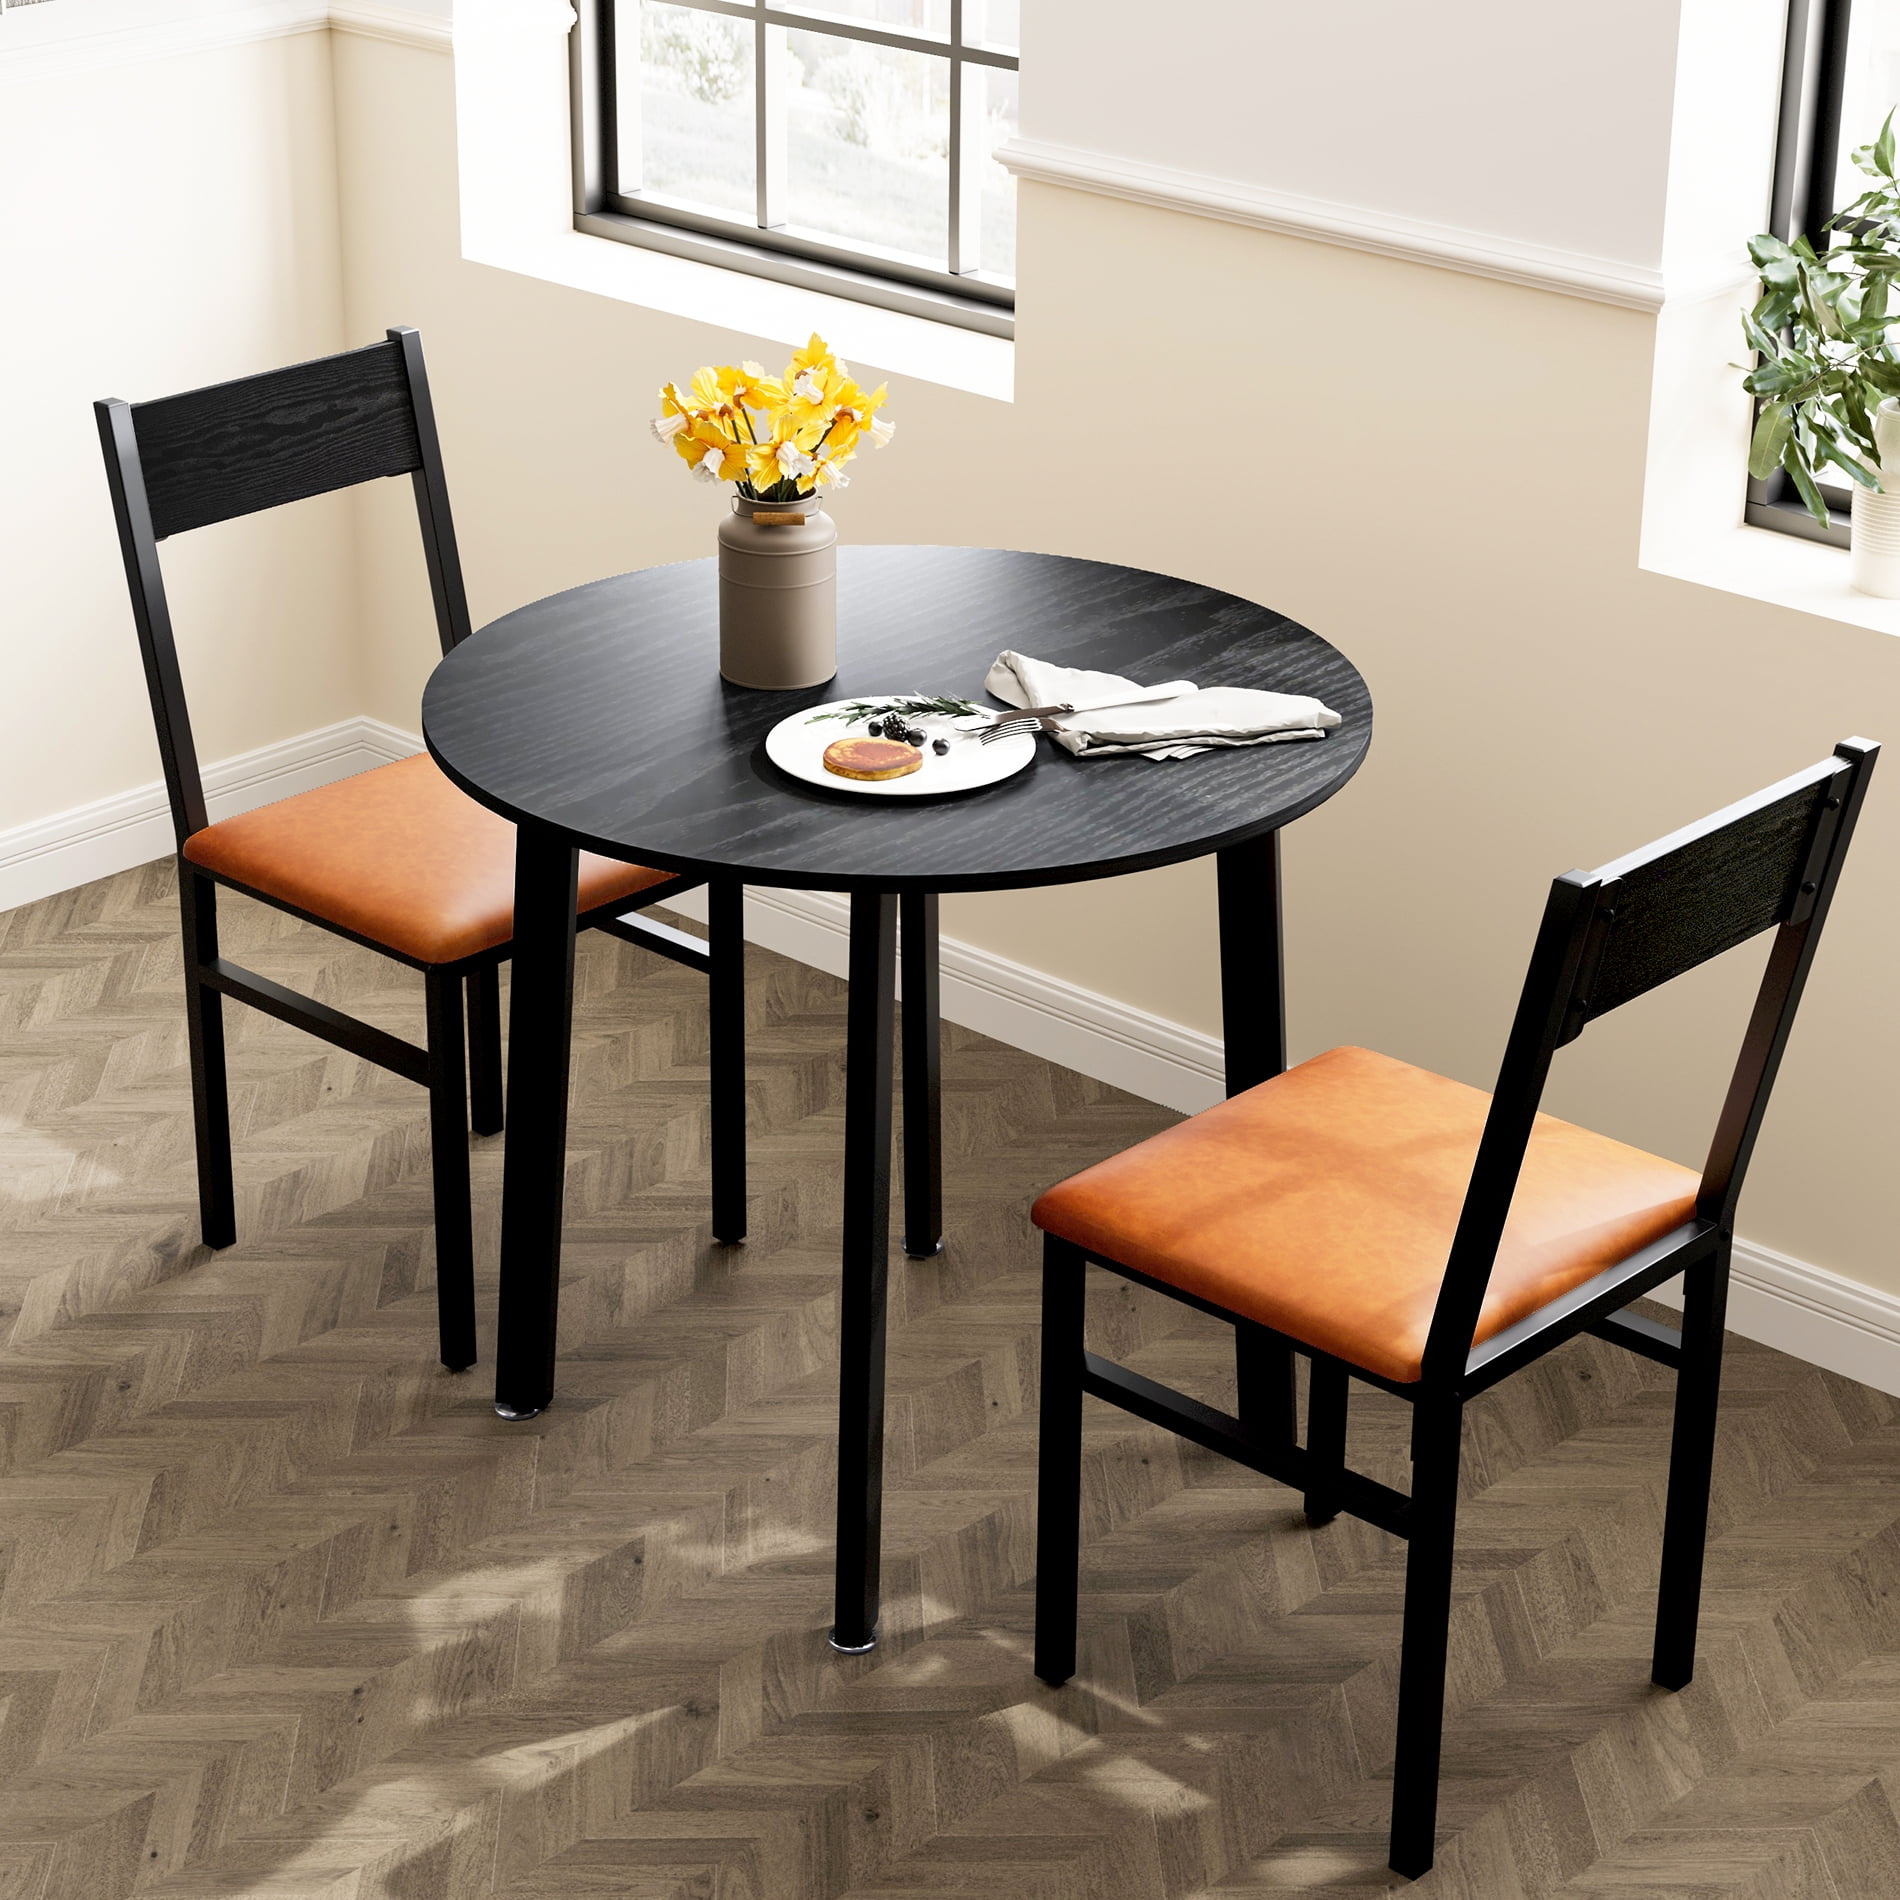 Homury 3 Piece Dining Table Set With Cushioned Chair Small Kitchen Table Set With 1 Table And 2 Chairs 8f3b7bcf 3693 46f3 Bc7f E00a9b7a24a4.344ea55c94289b4b42c8630d17f6d972 